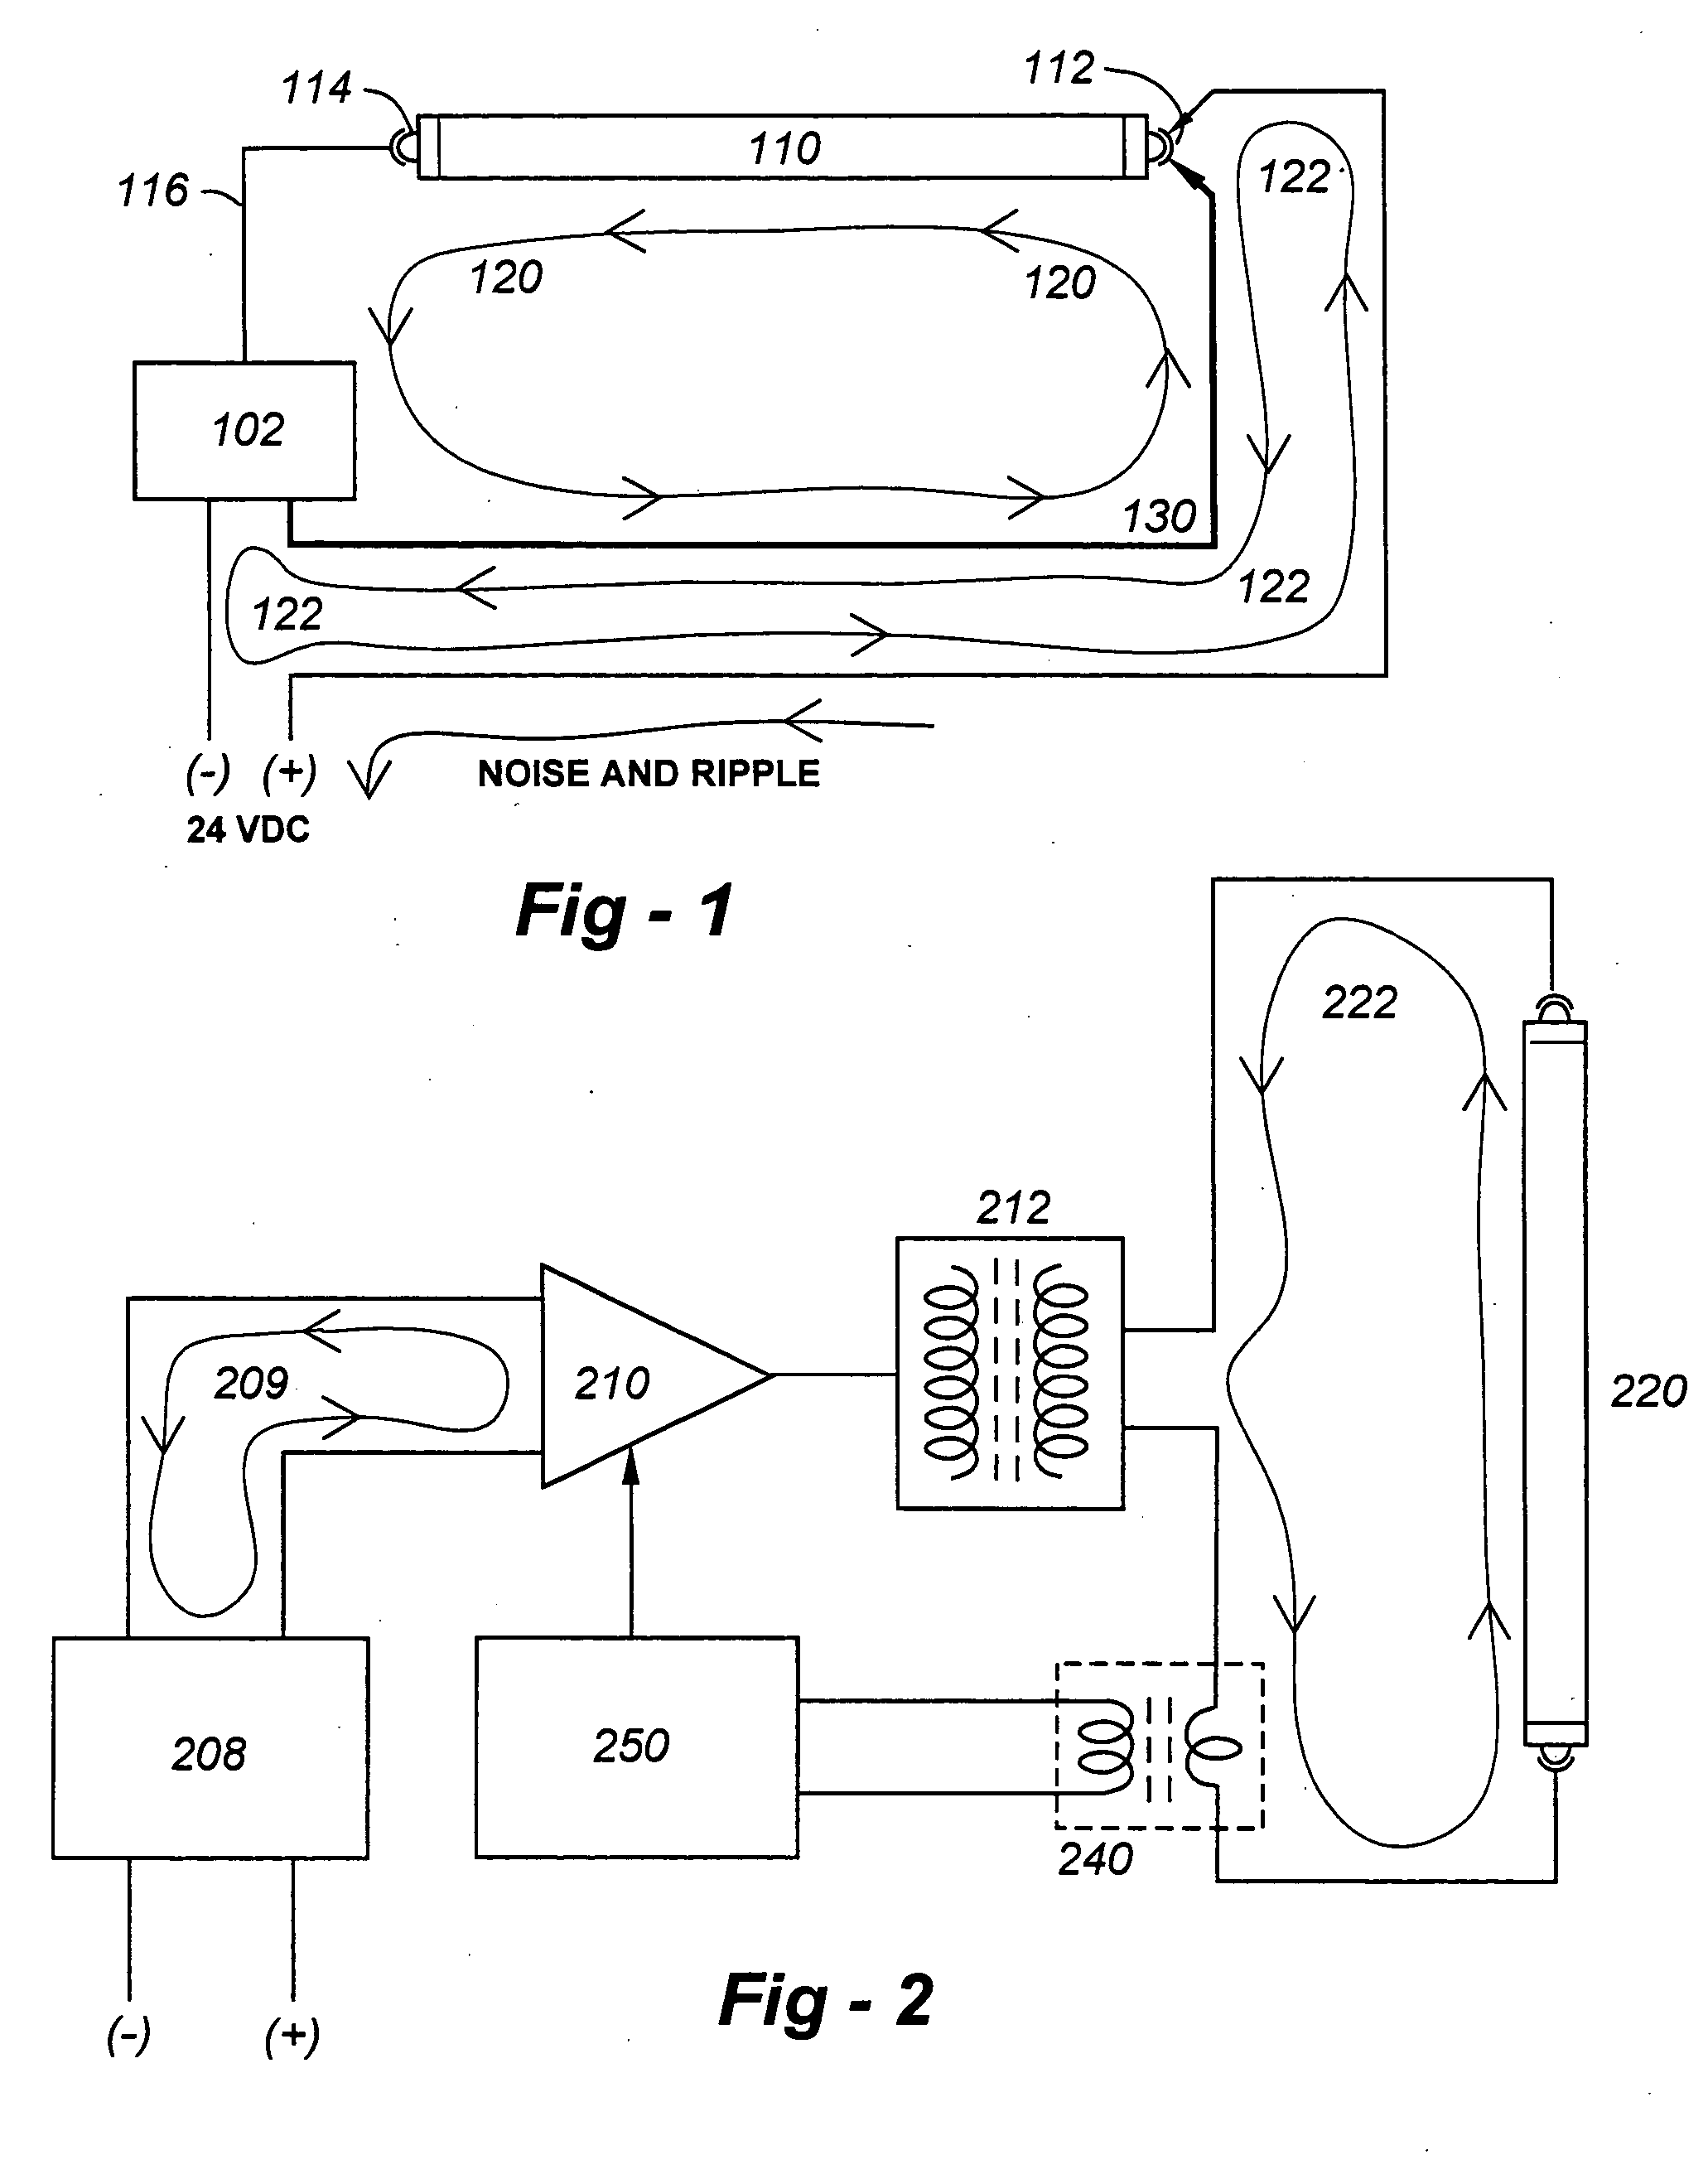 Multiple failure detection shutdown protection circuit for an electronic ballast